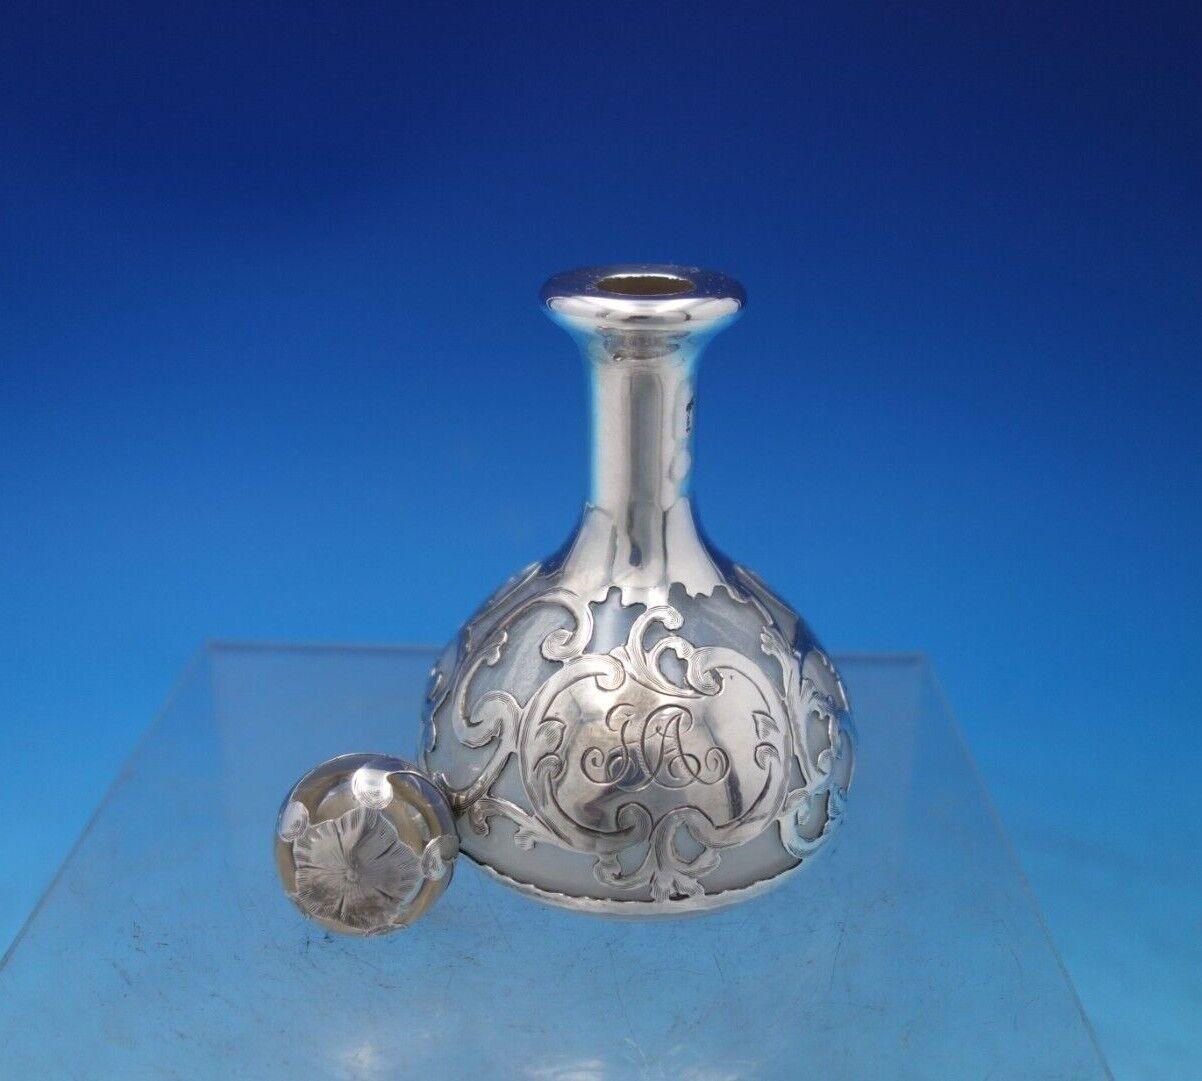 20th Century Gorham Glass Perfume Bottle with Silver Overlay